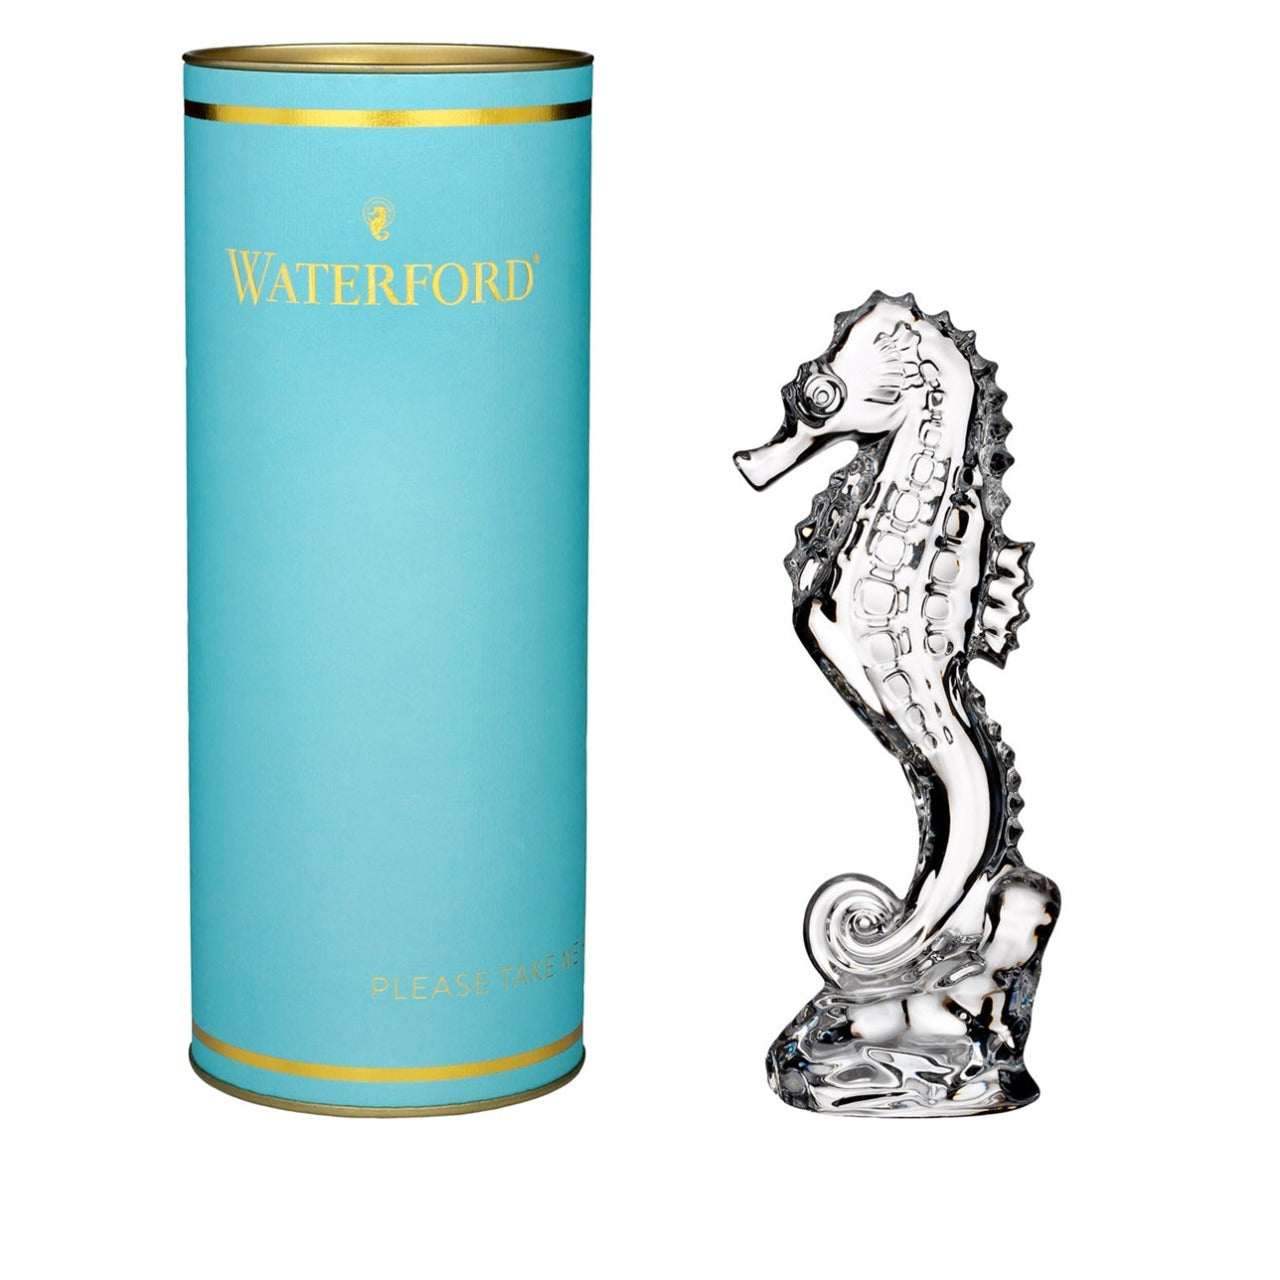 Giftology Seahorse Collectible by Waterford  One of Waterford Crystal's most iconic shapes, the seahorse is not only the symbol of Waterford crystal but the city of Waterford itself.  The Giftology collection features Waterford's best crystal gifts in compelling gift boxes We think of Giftology as the science of gift giving in a fast paced world. The Giftology Crystal Seahorse Collectible is simply a perfect gift for multiple gift solutions.